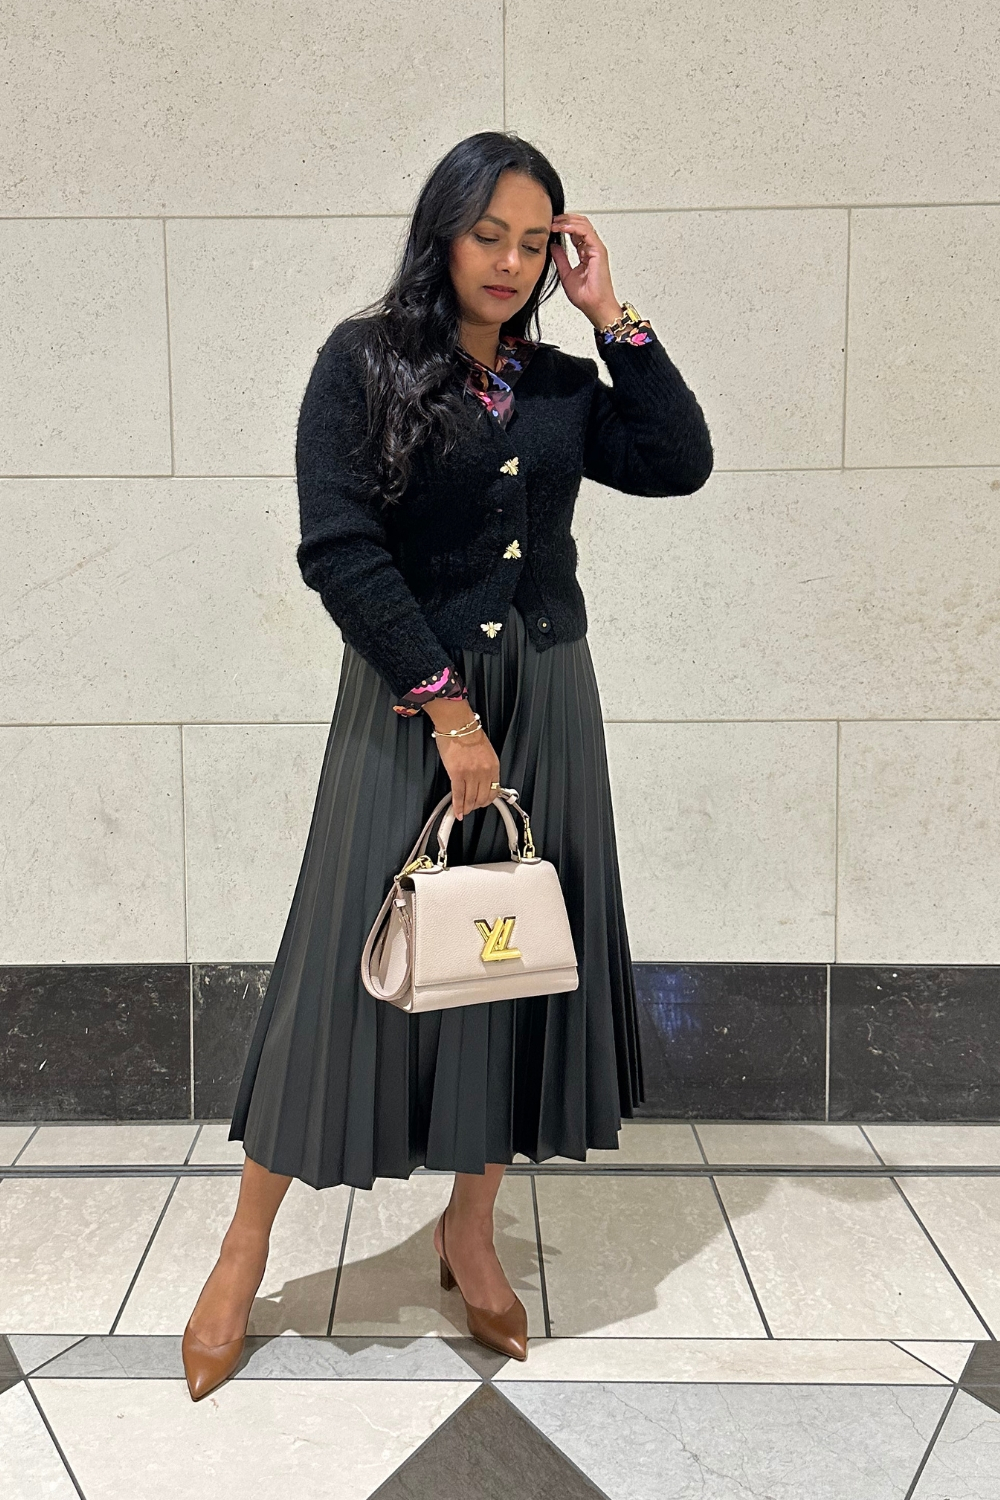 Black Cardigan outfit with leather skirt and printed shirt